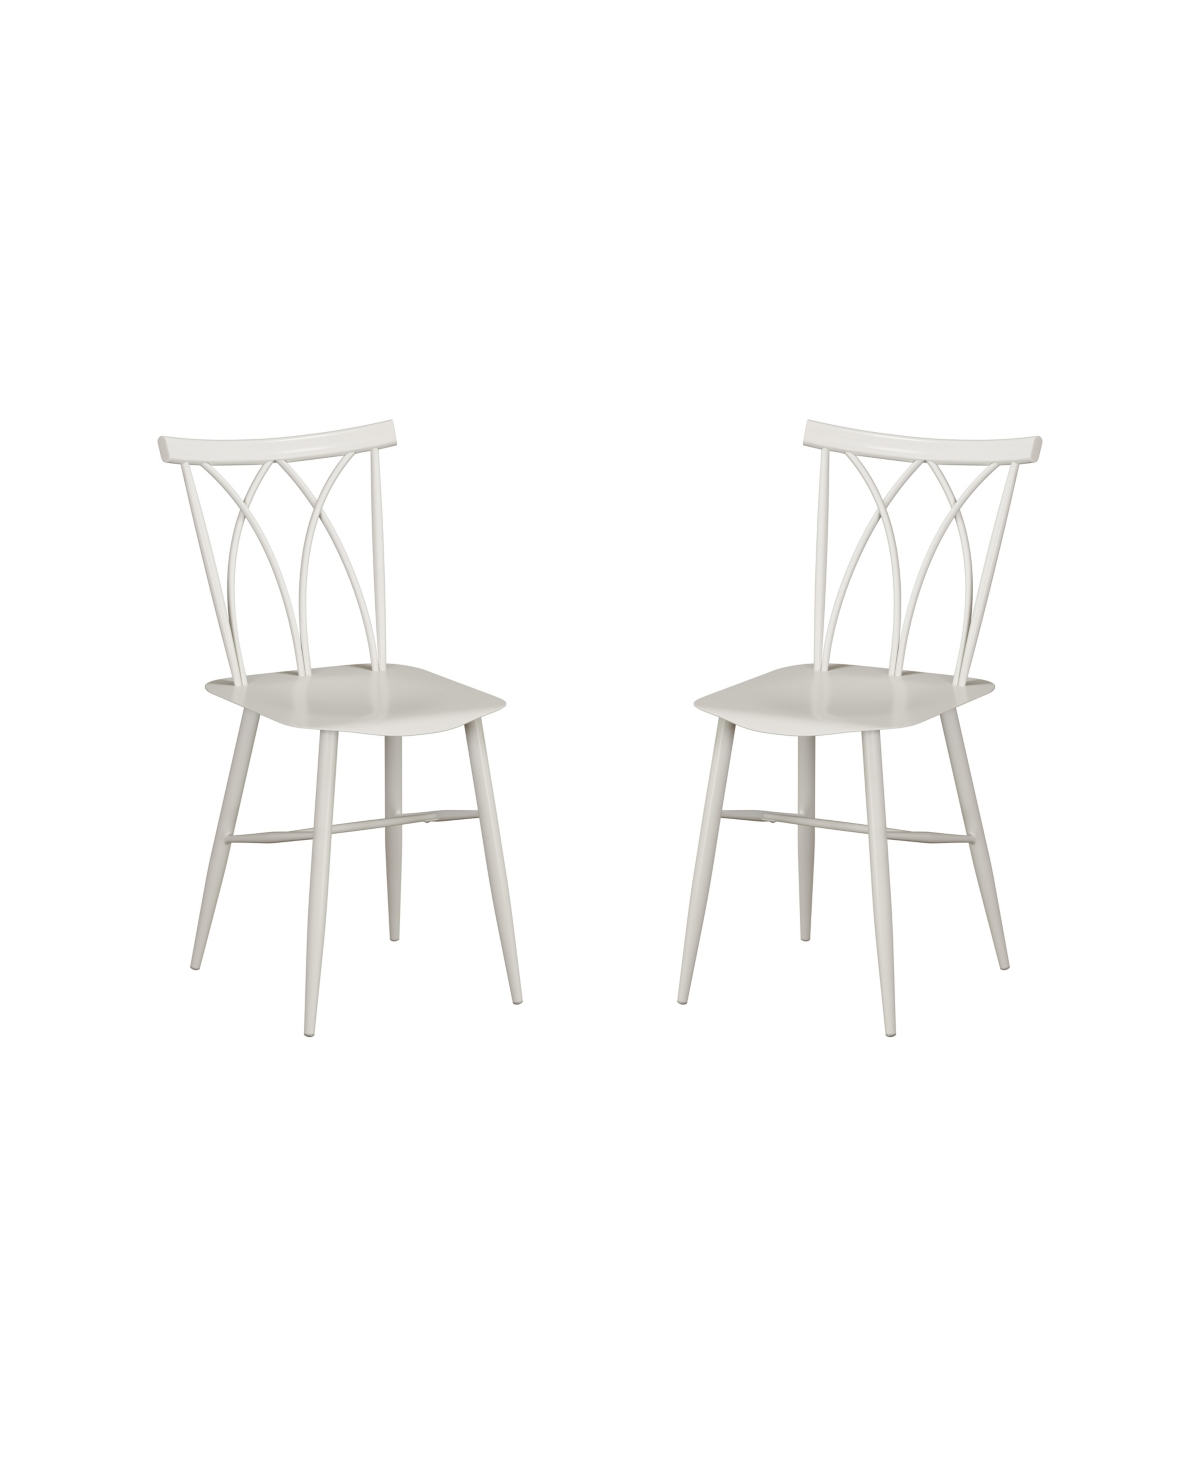 Lifestyle Solutions 15.7" 2 Piece Iron Lea Chair Set In White